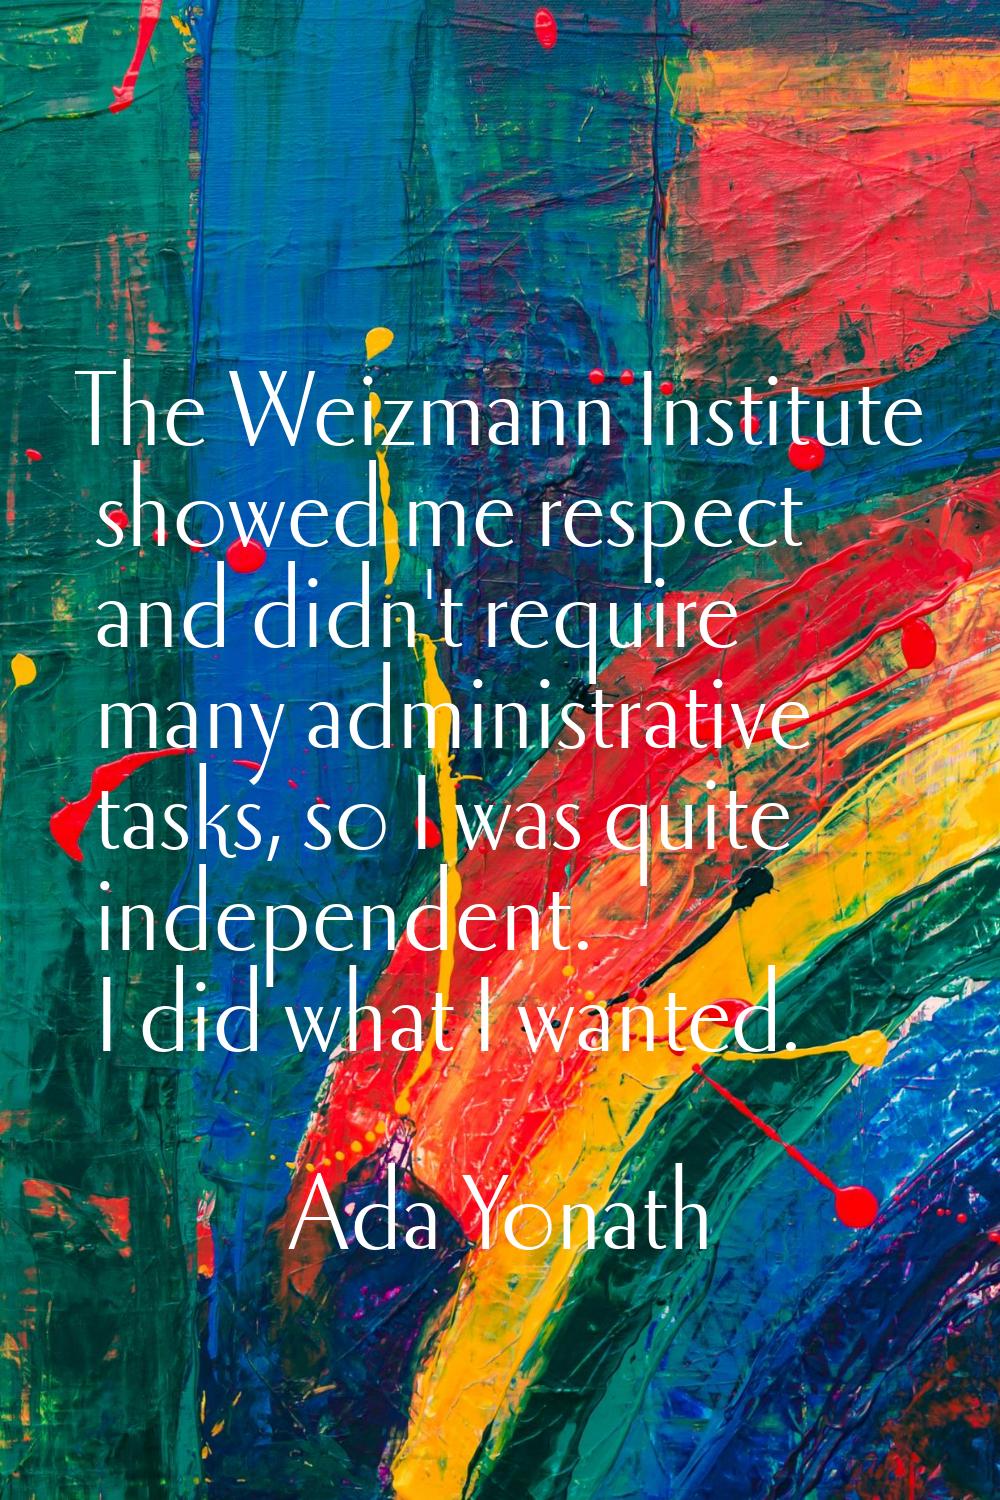 The Weizmann Institute showed me respect and didn't require many administrative tasks, so I was qui